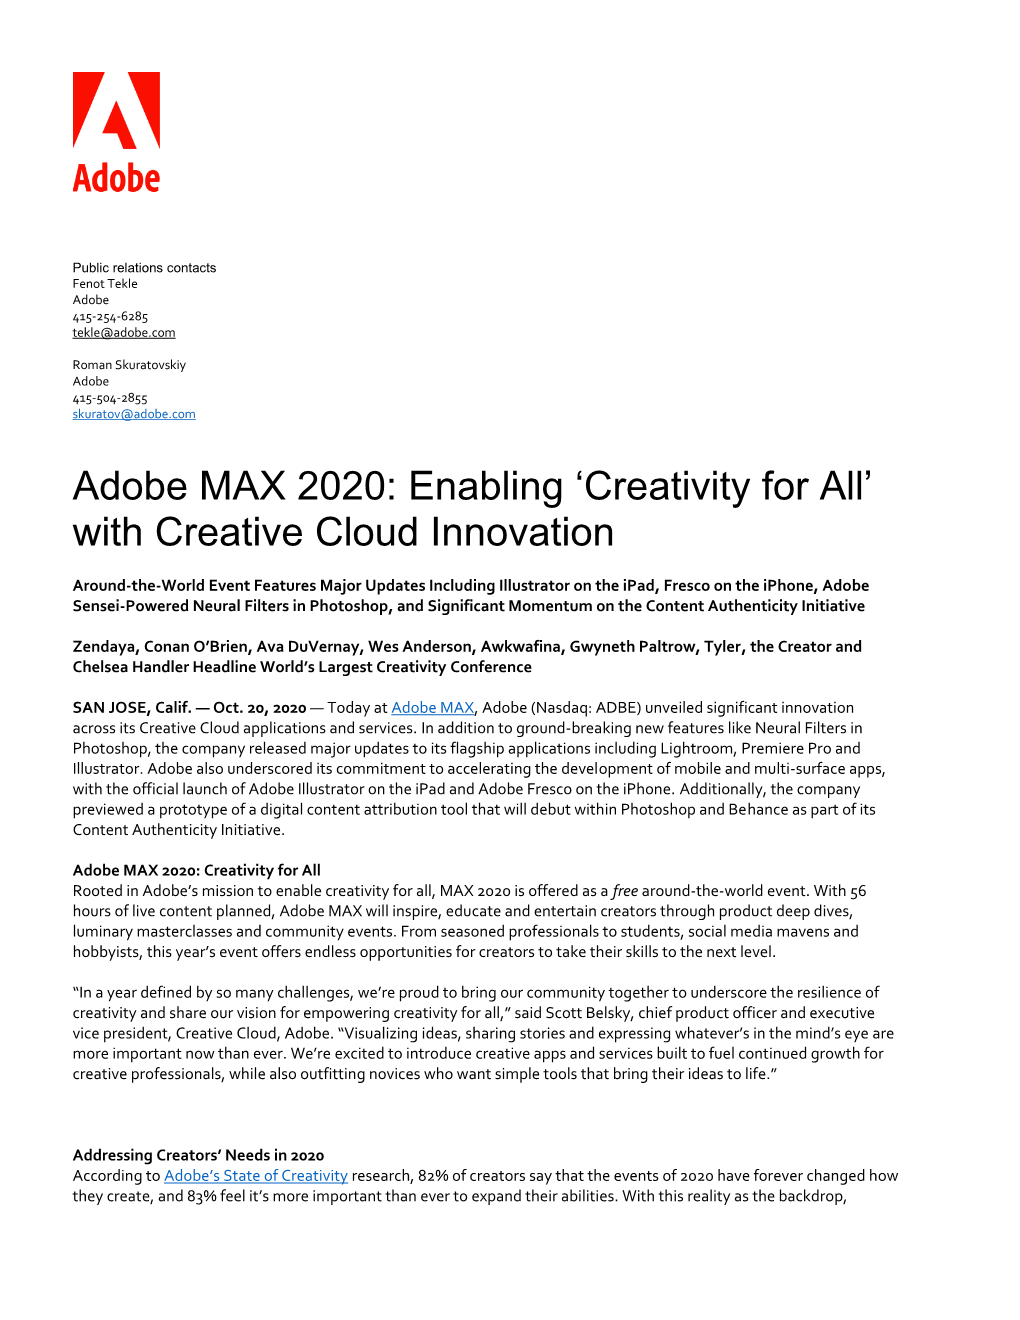 Adobe MAX 2020: Enabling 'Creativity for All' with Creative